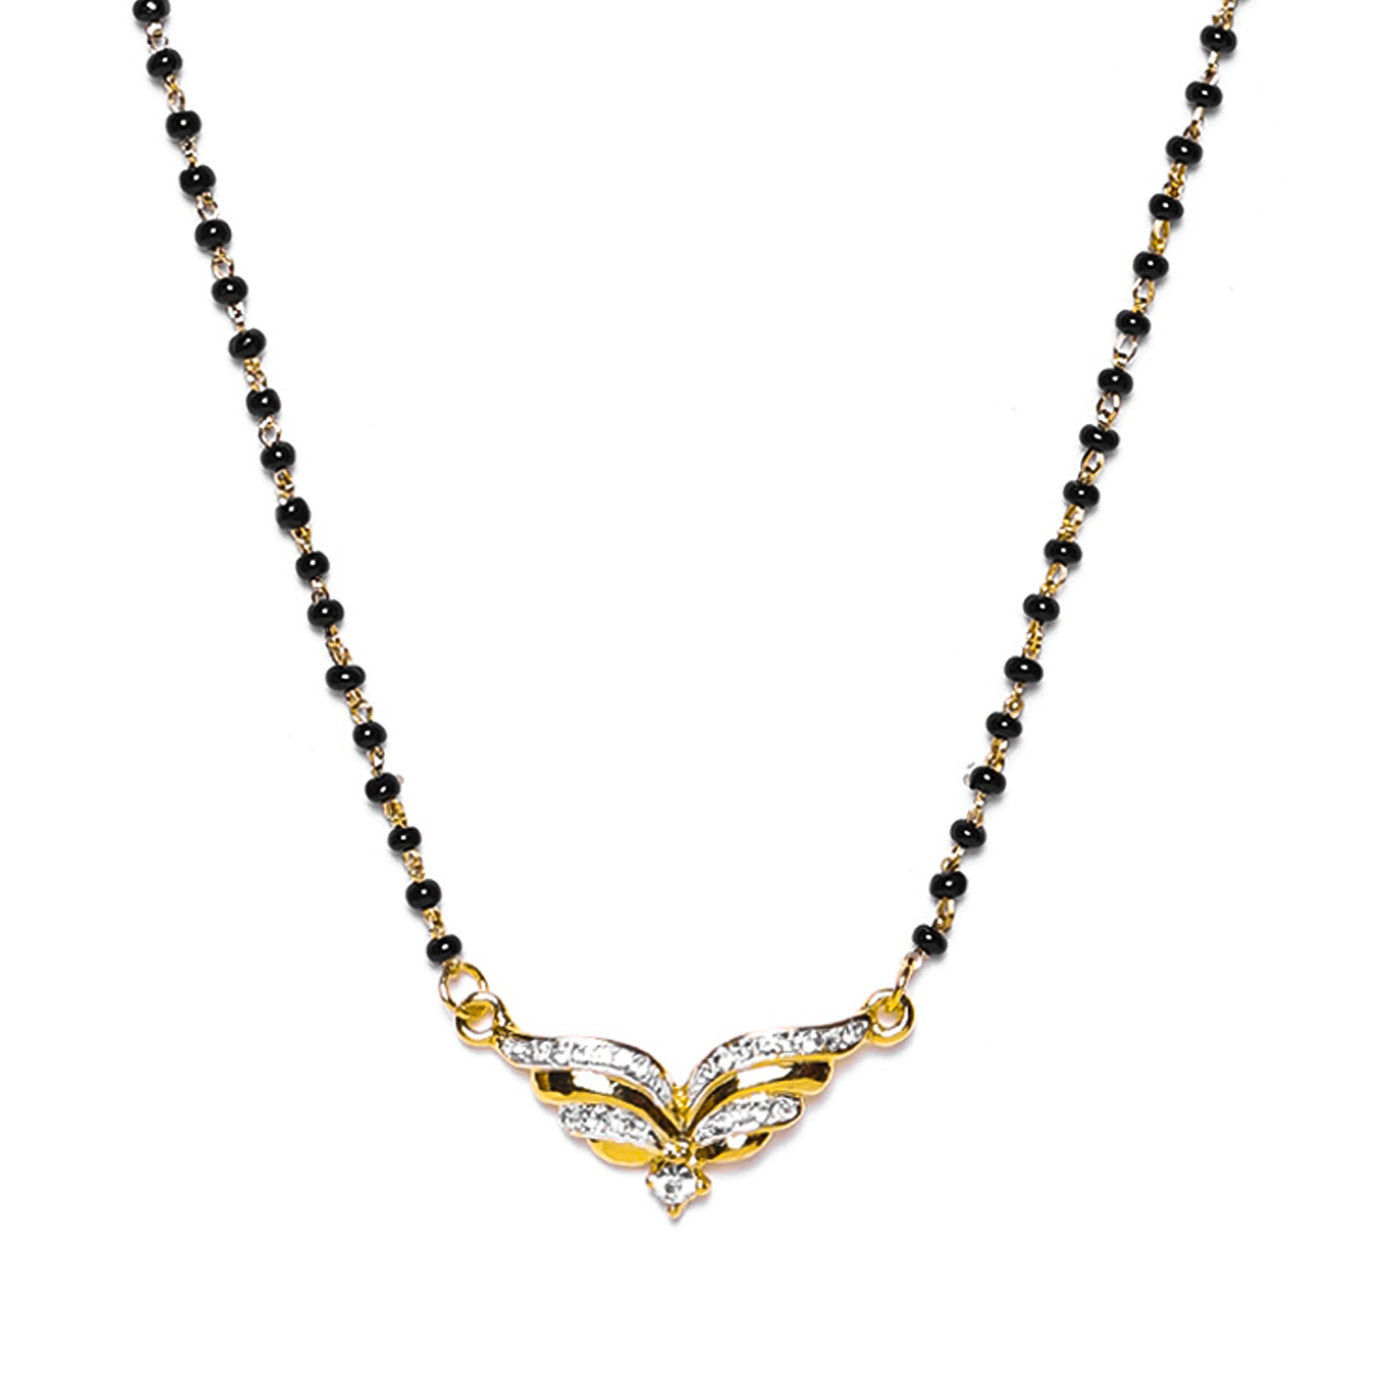 Estele Gold & Rhodium Plated Exquisite Mangalsutra Necklace with Austrian Crystals for Women